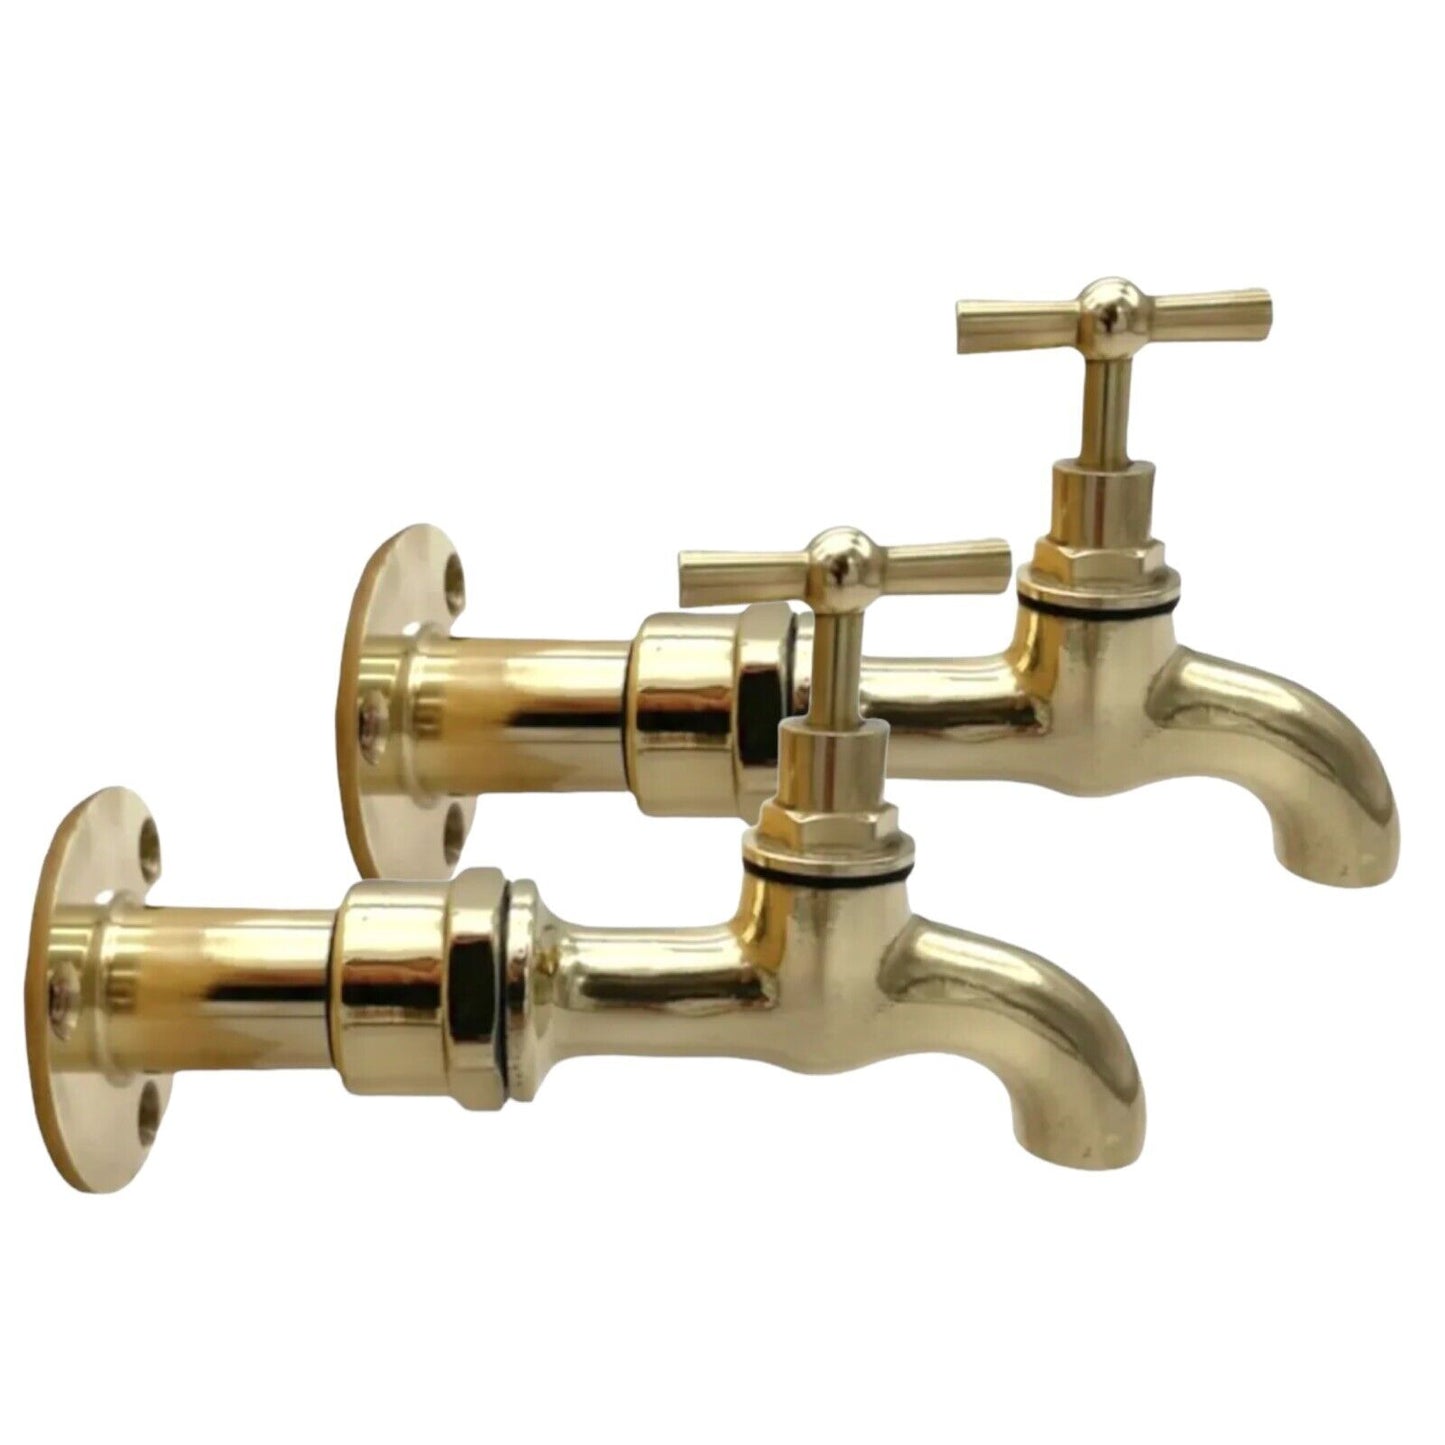 Solid brass wall mounted kitchen or bathroom taps sold by All Things French Store